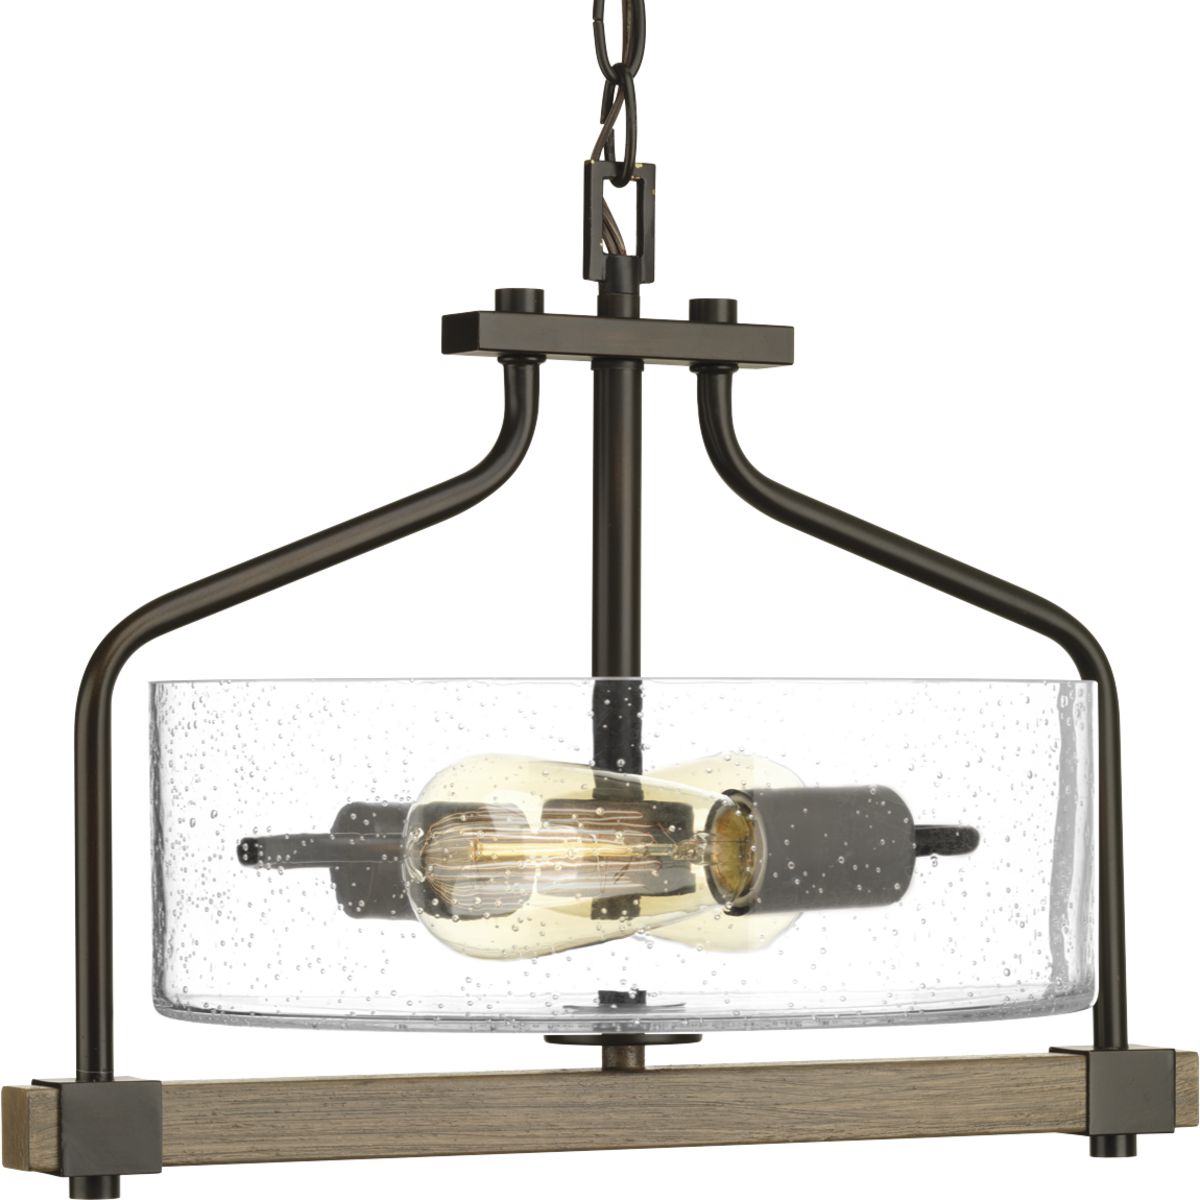 Rustic and vintage decor can transform your home into a nostalgic retreat reminiscent of rural farmhouses. Exposed iron details and a faux-painted wooden plank support artful, clear, seeded glass shades. Combine with vintage-style light bulbs to create a romantic focal point for any room. Two-Light semi-flush.